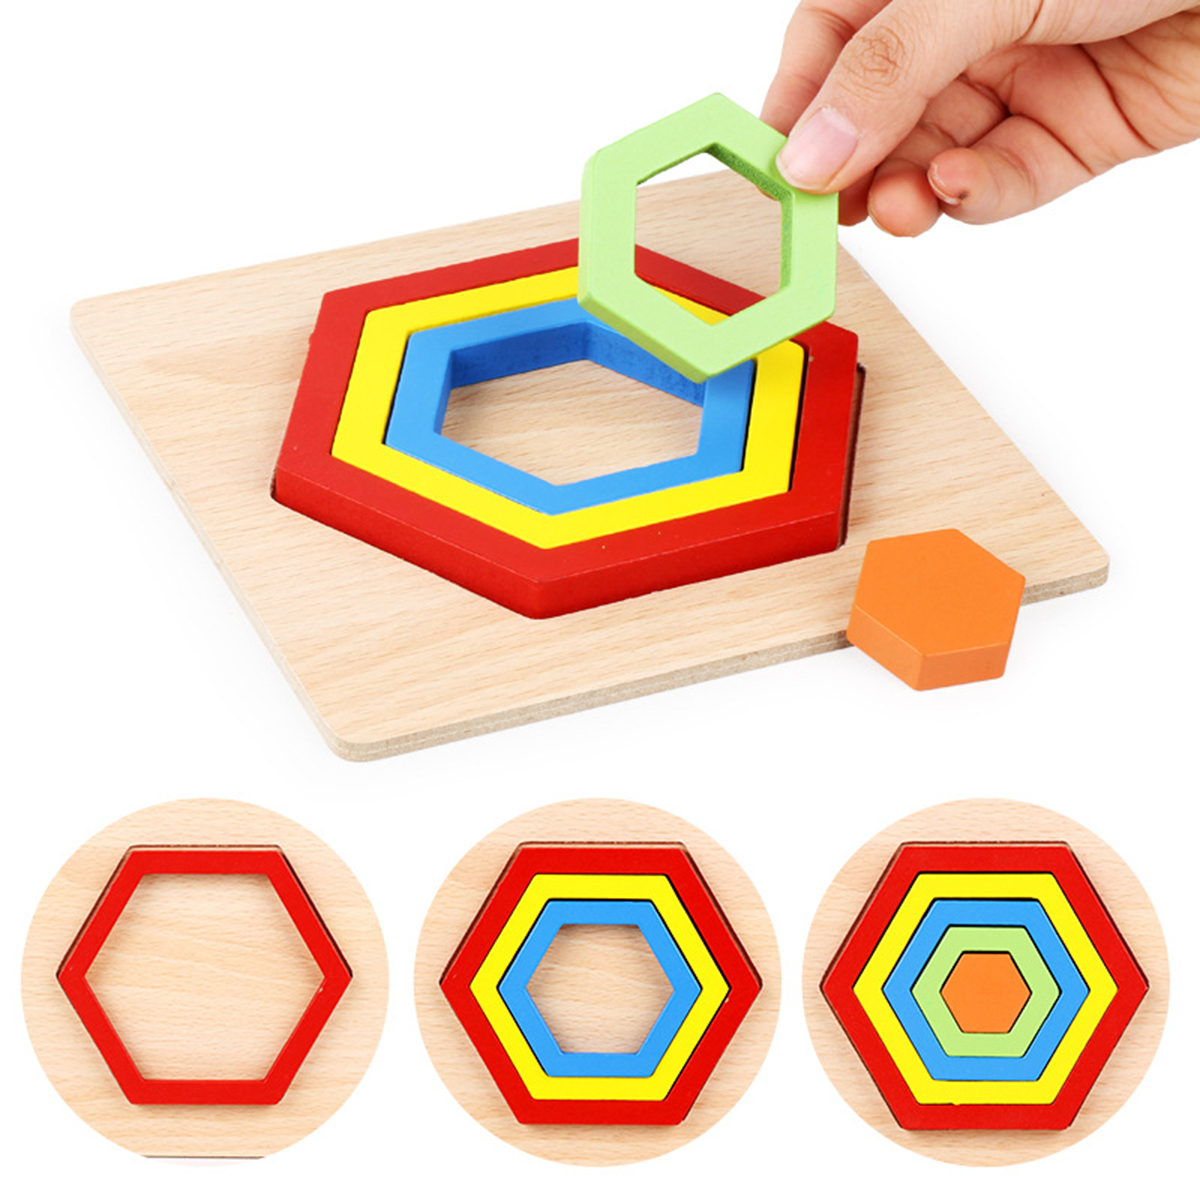 Shape Cognition Board Geometry Jigsaw Puzzle Wooden Kids Educational Learning Toys 9